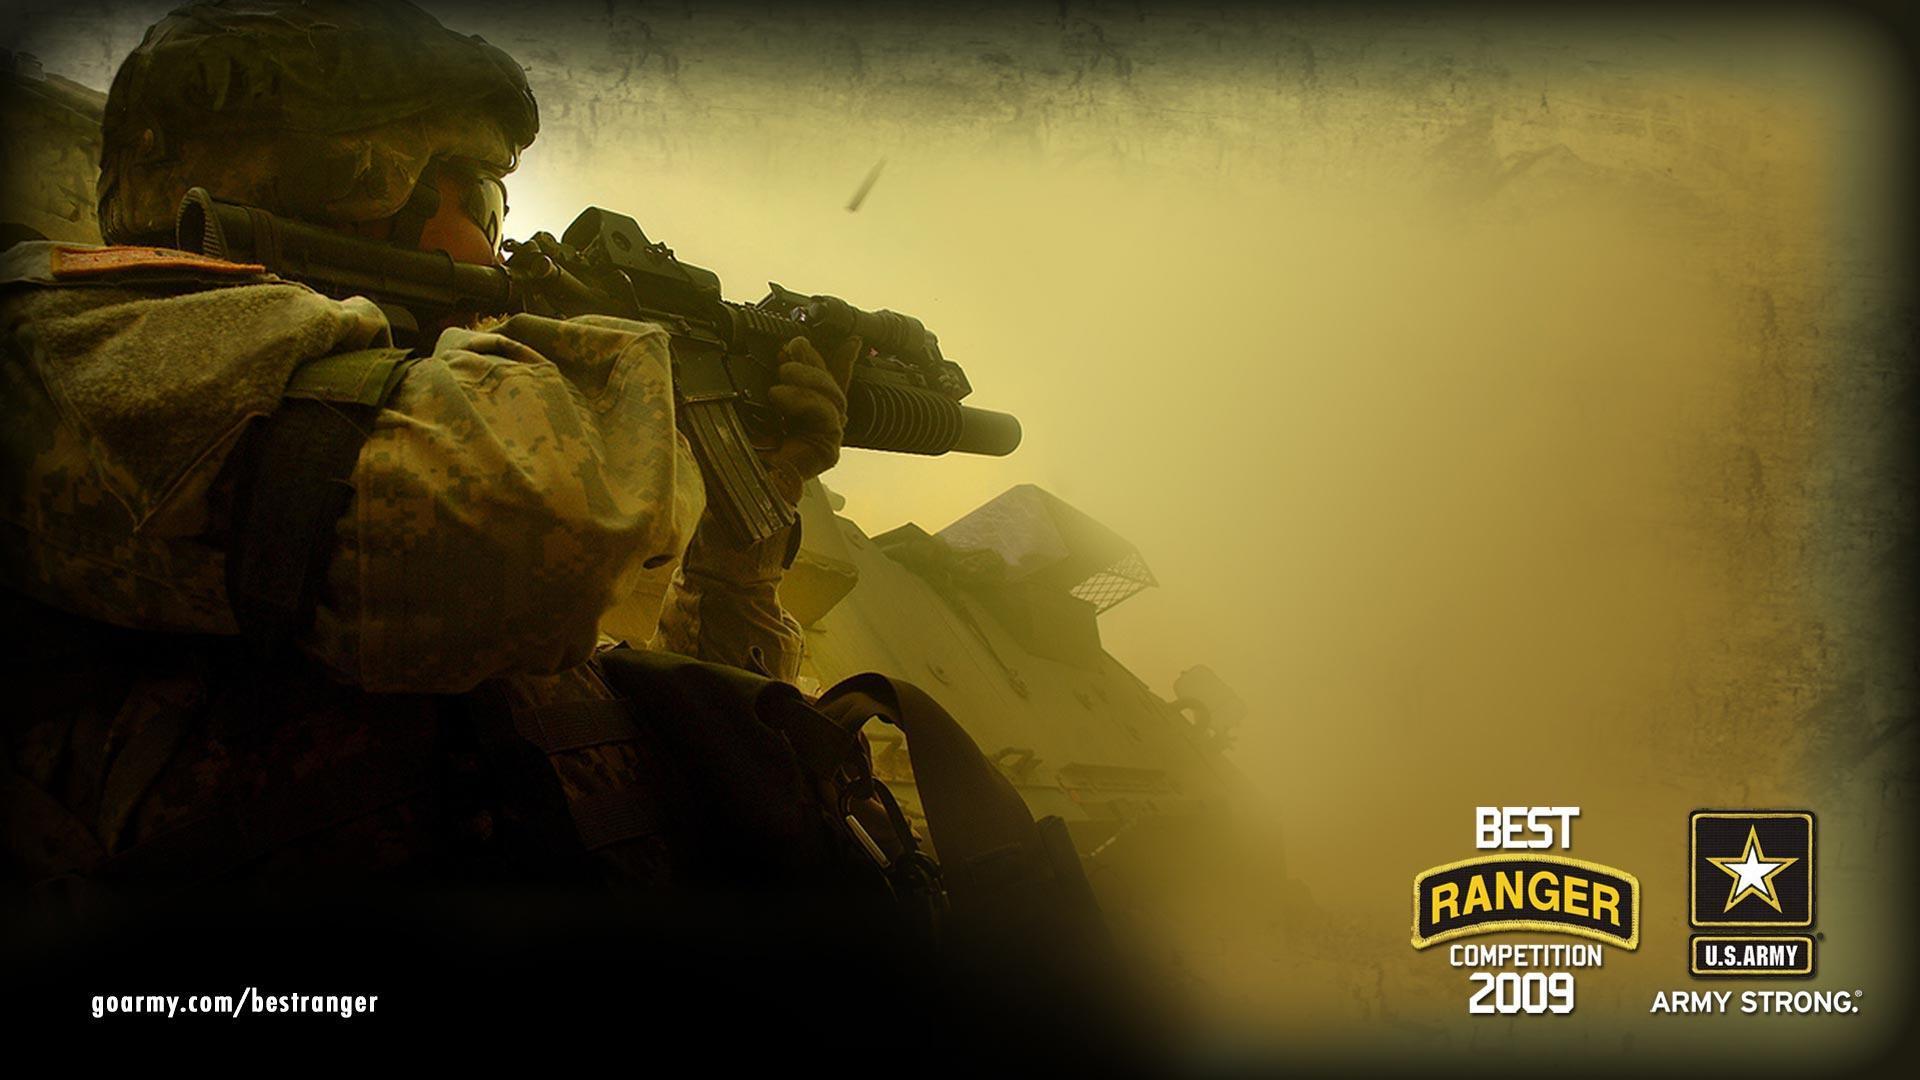 Wallpapers For > Army Ranger Wallpapers